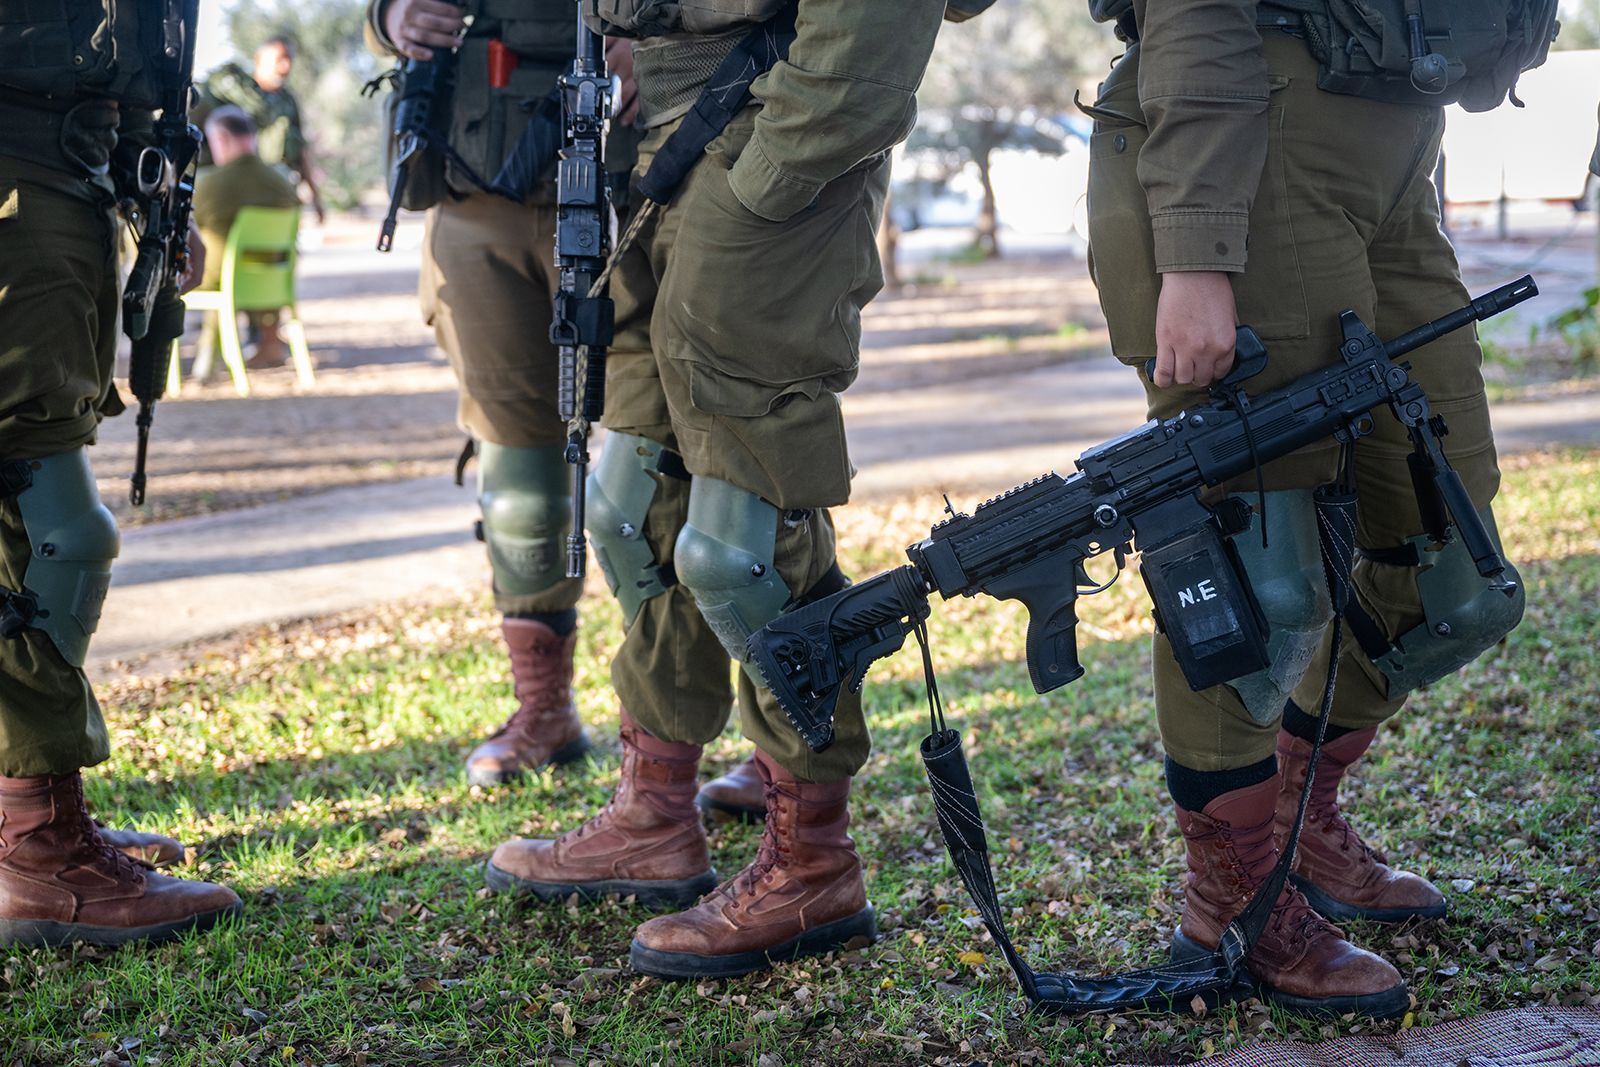 Soldiers from the IDF's coed infantry battalion 'Bardelas' guard an Israeli community in Southern Israel on November 5.